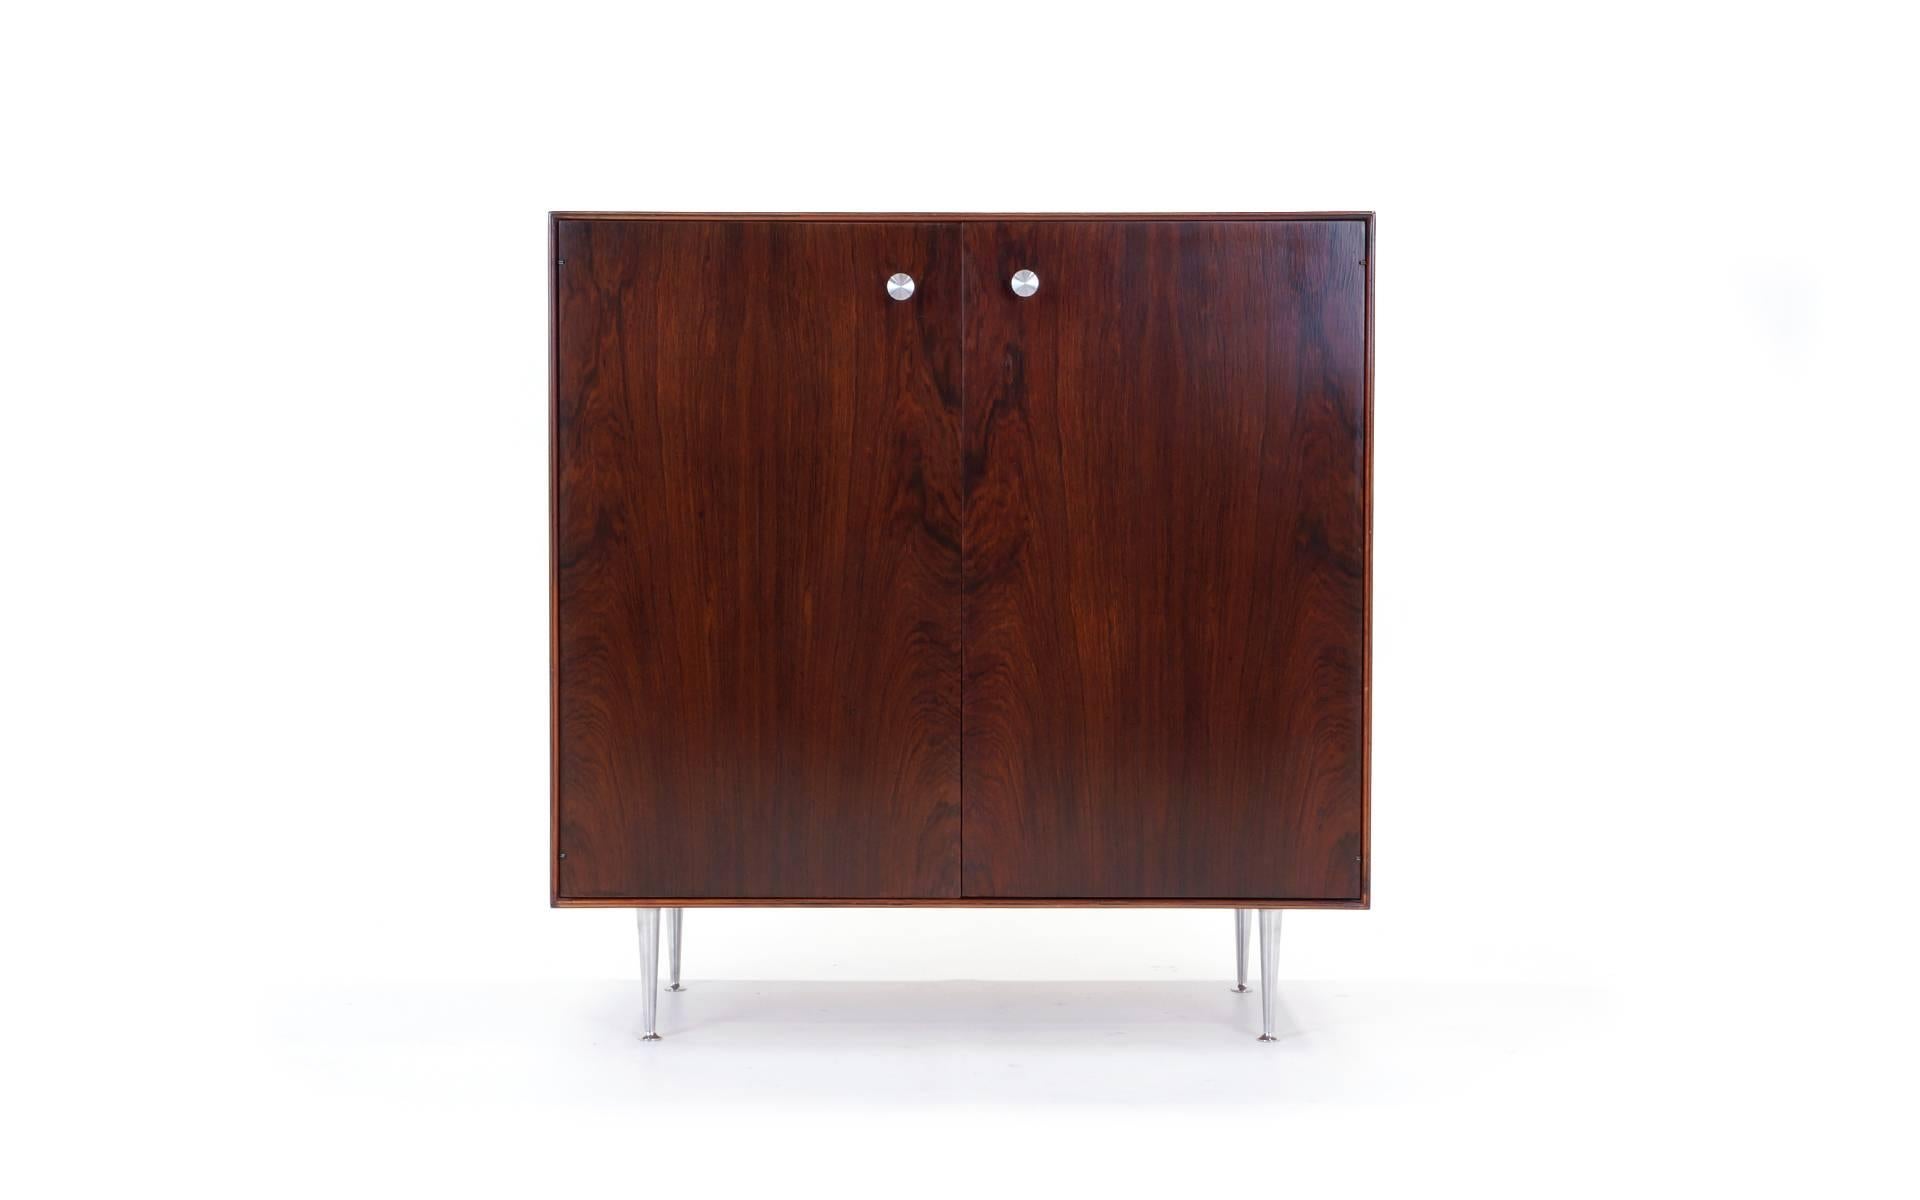 Beautiful, all original, thin edge cabinet in Brazilian rosewood with aluminum legs and pulls.